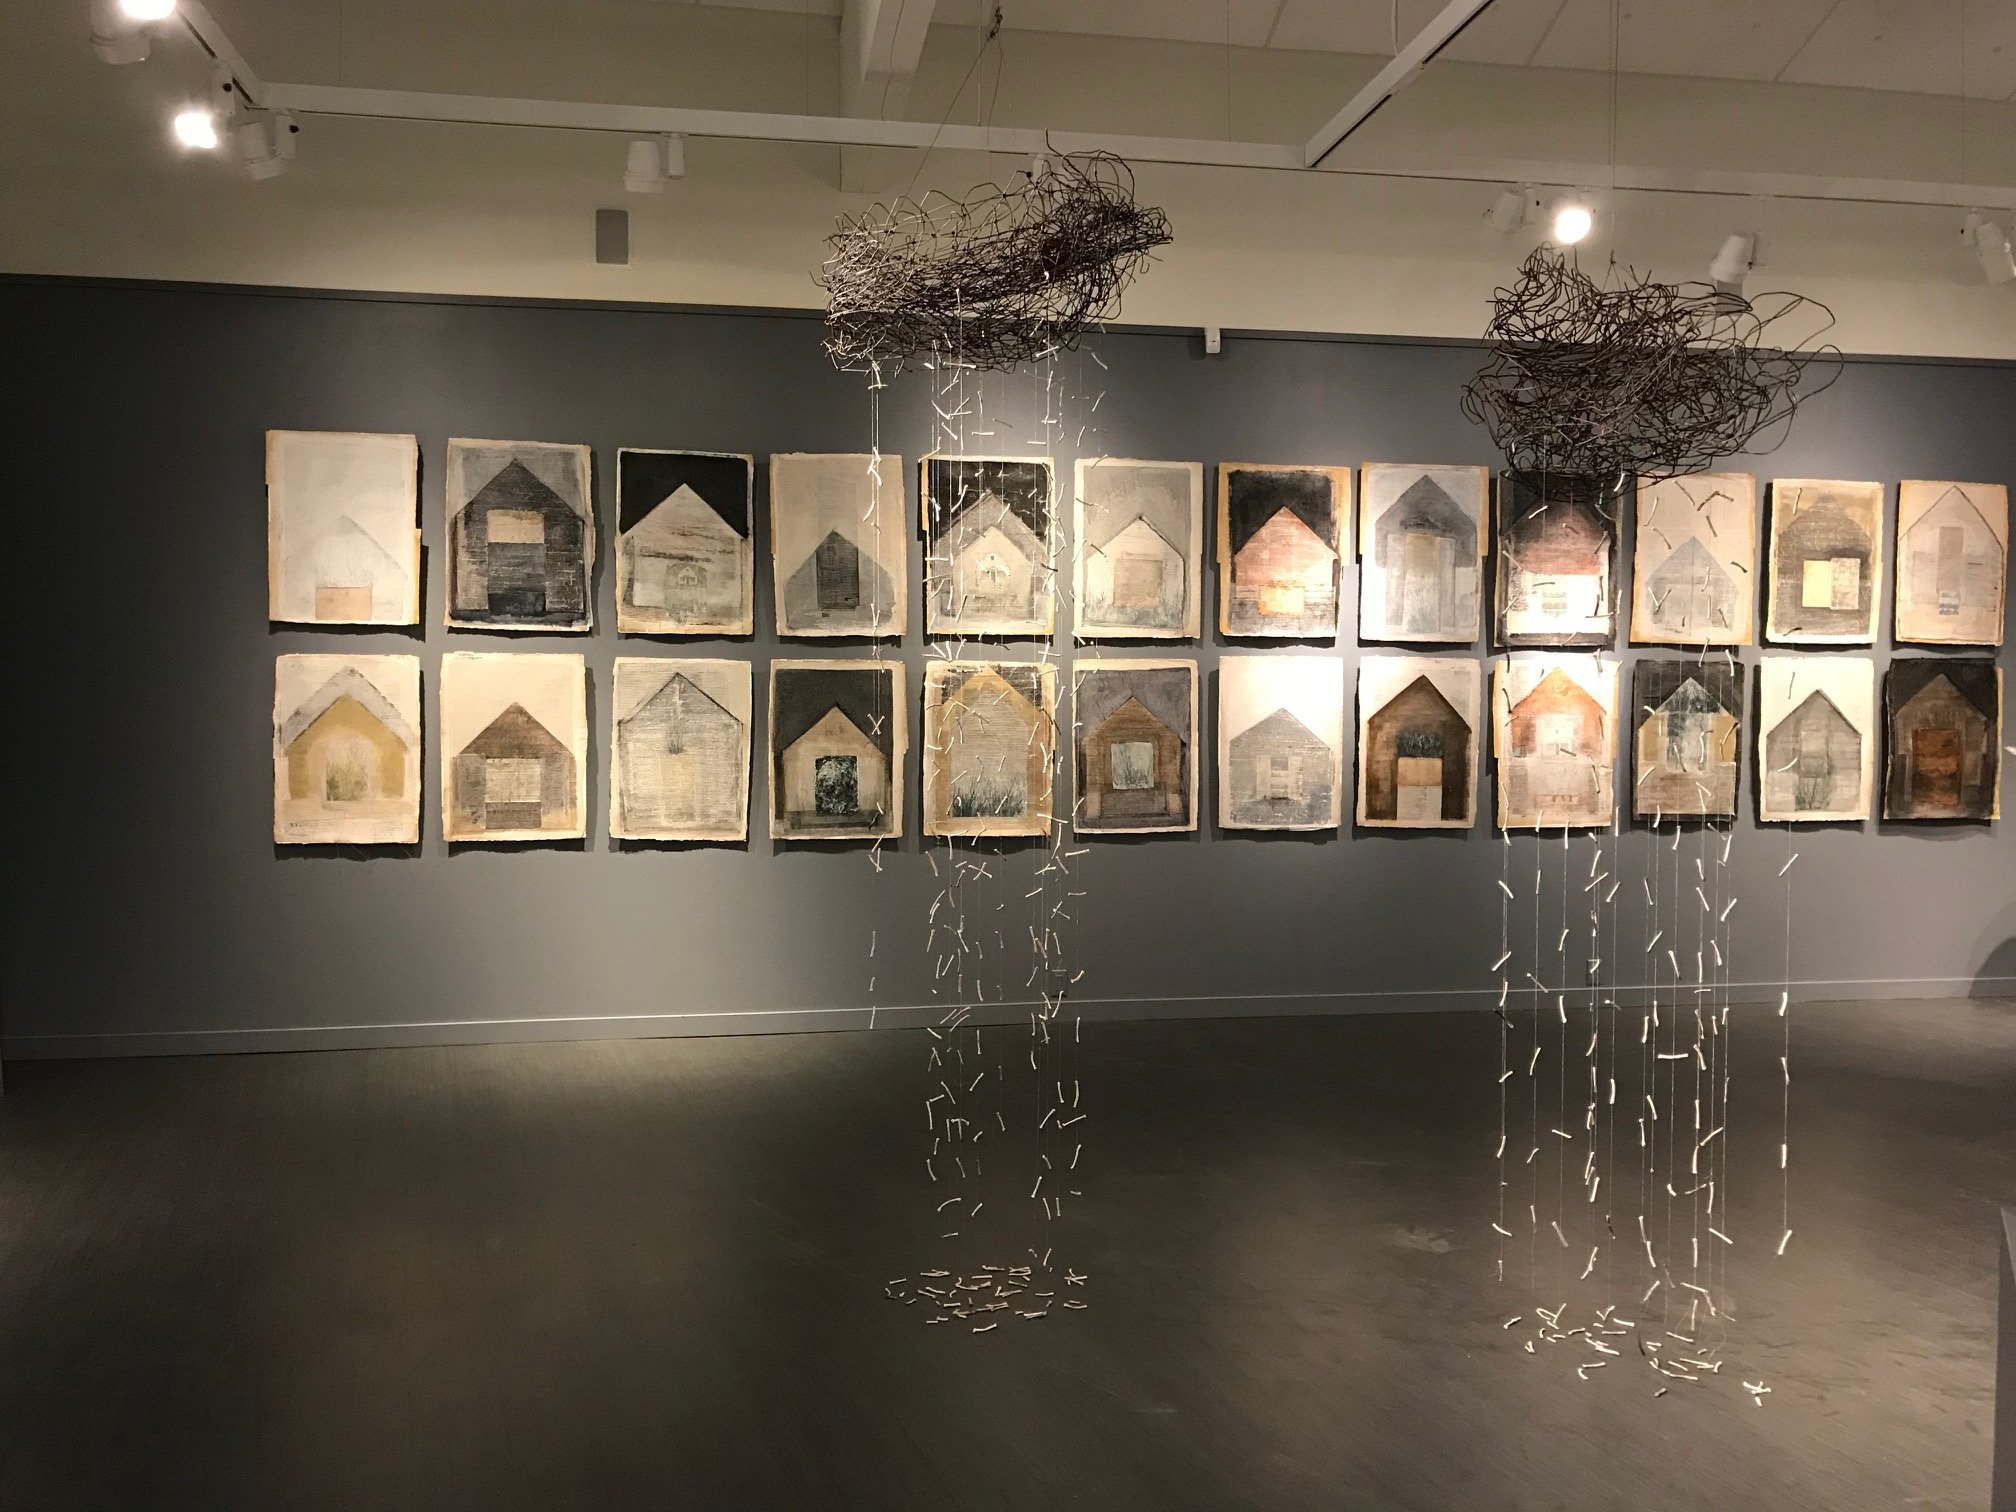  Installation view,  Tears for the World,       2014 - 2018,  clay, found rusted metal, string  San Juan Museum of Art,  2018  3-person show with Kandis Susol and Susan Singleton   